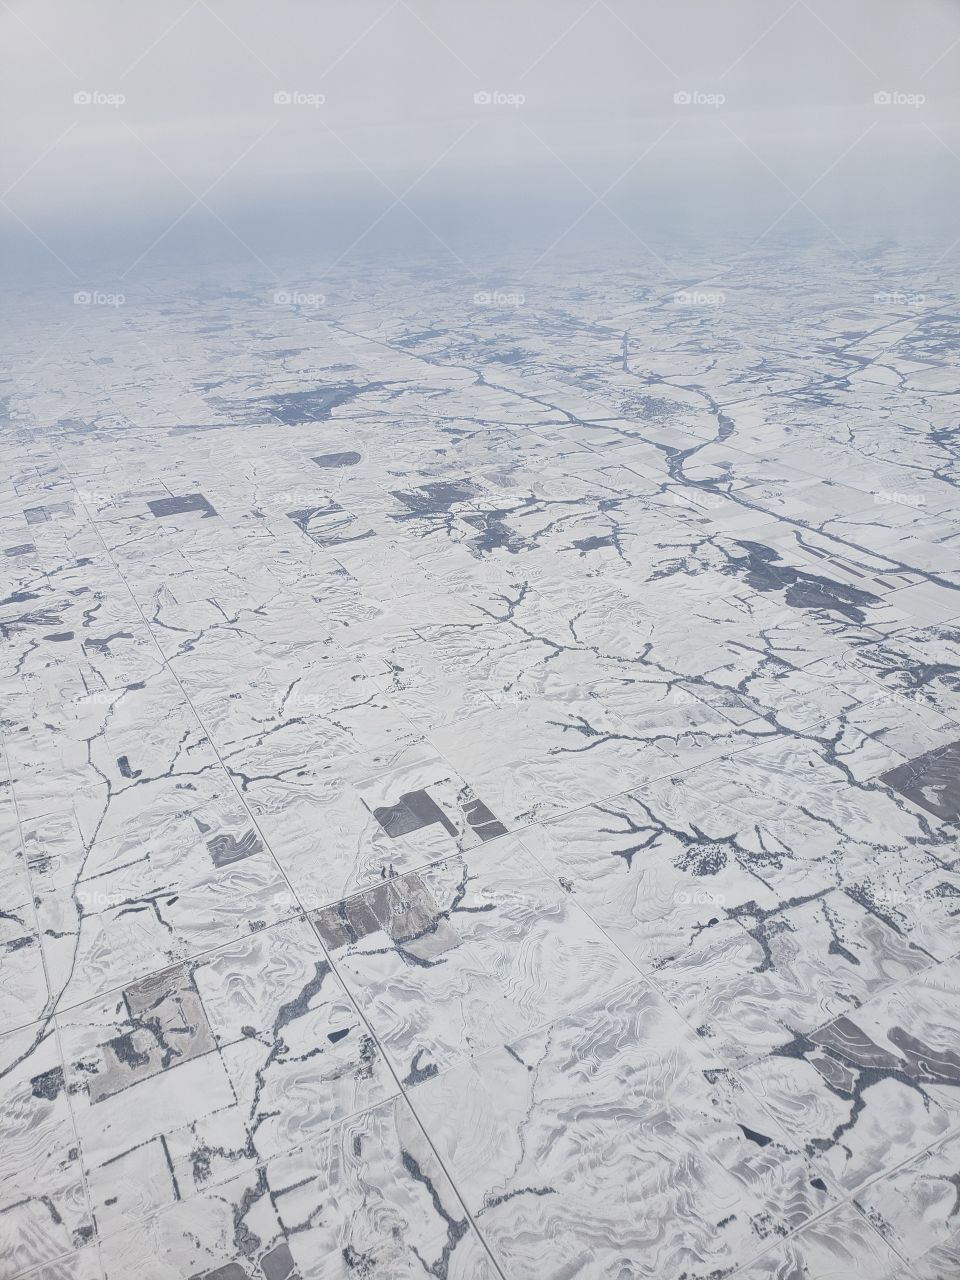 Snow and crops from the plane